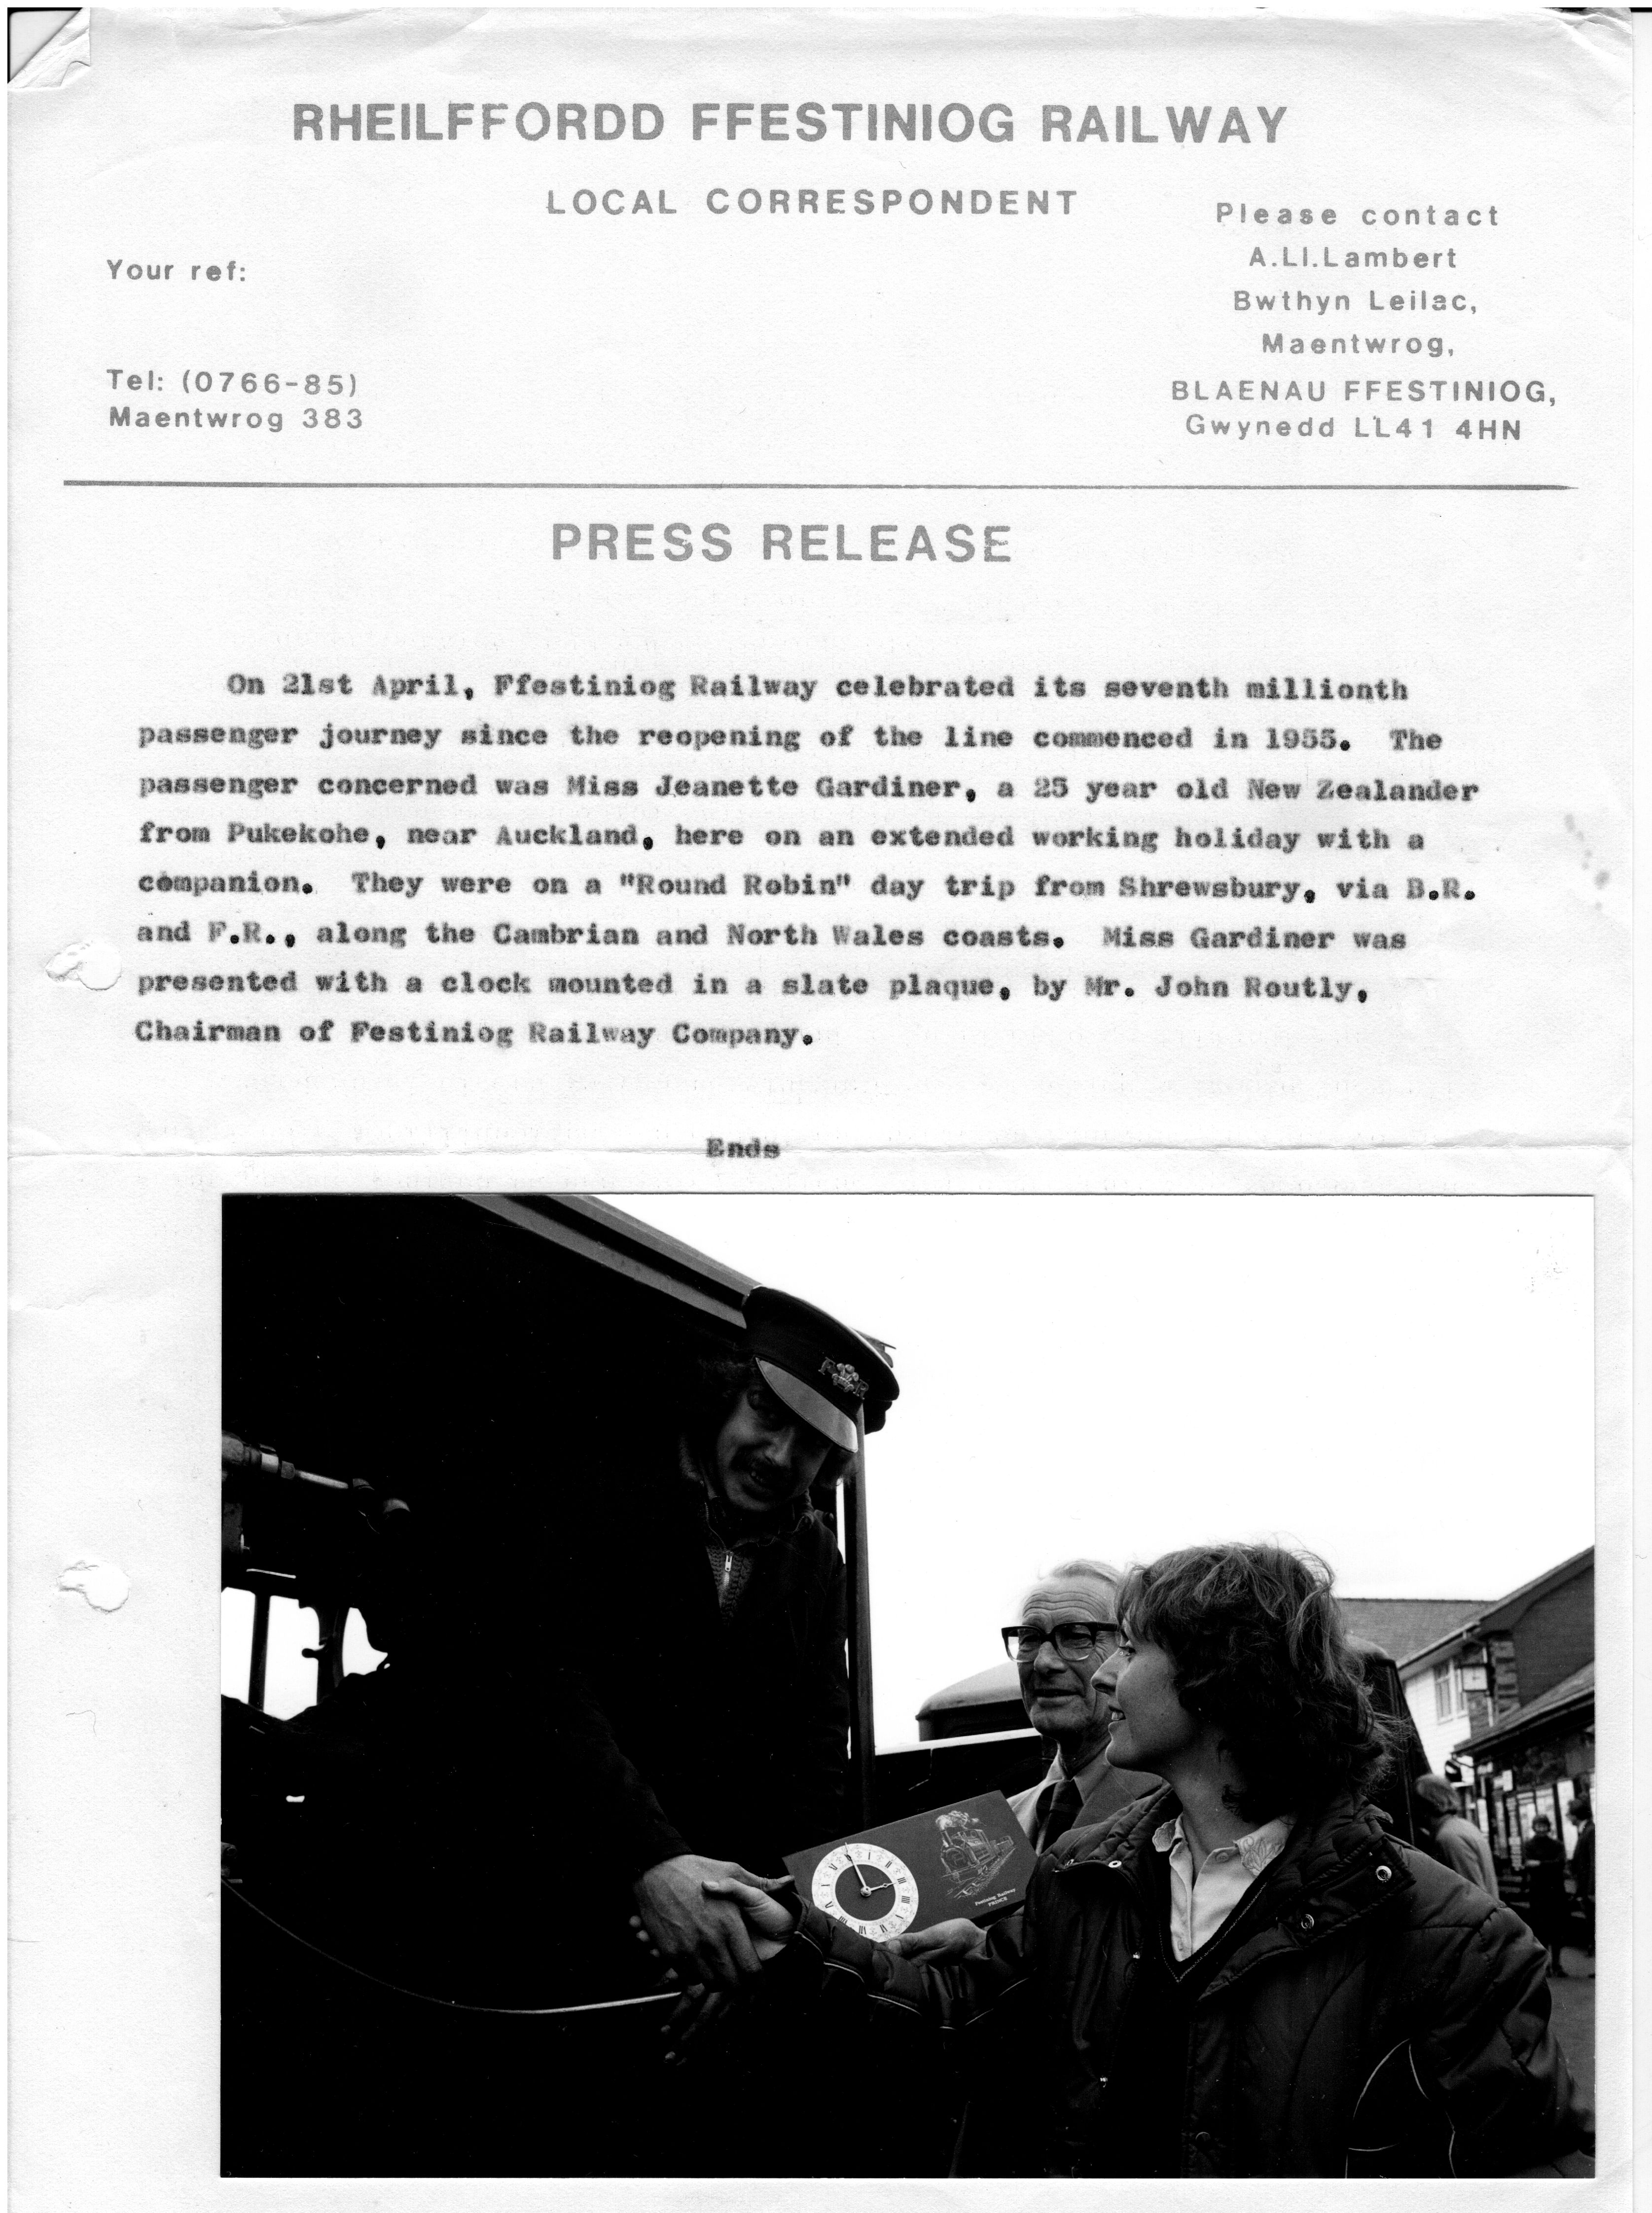 NGRS Collection 3 - Ffestiniog Rly - 21 Apr undated year  - FR Press release with photo of  7 millionth passenger J Gardiner - FR.jpg